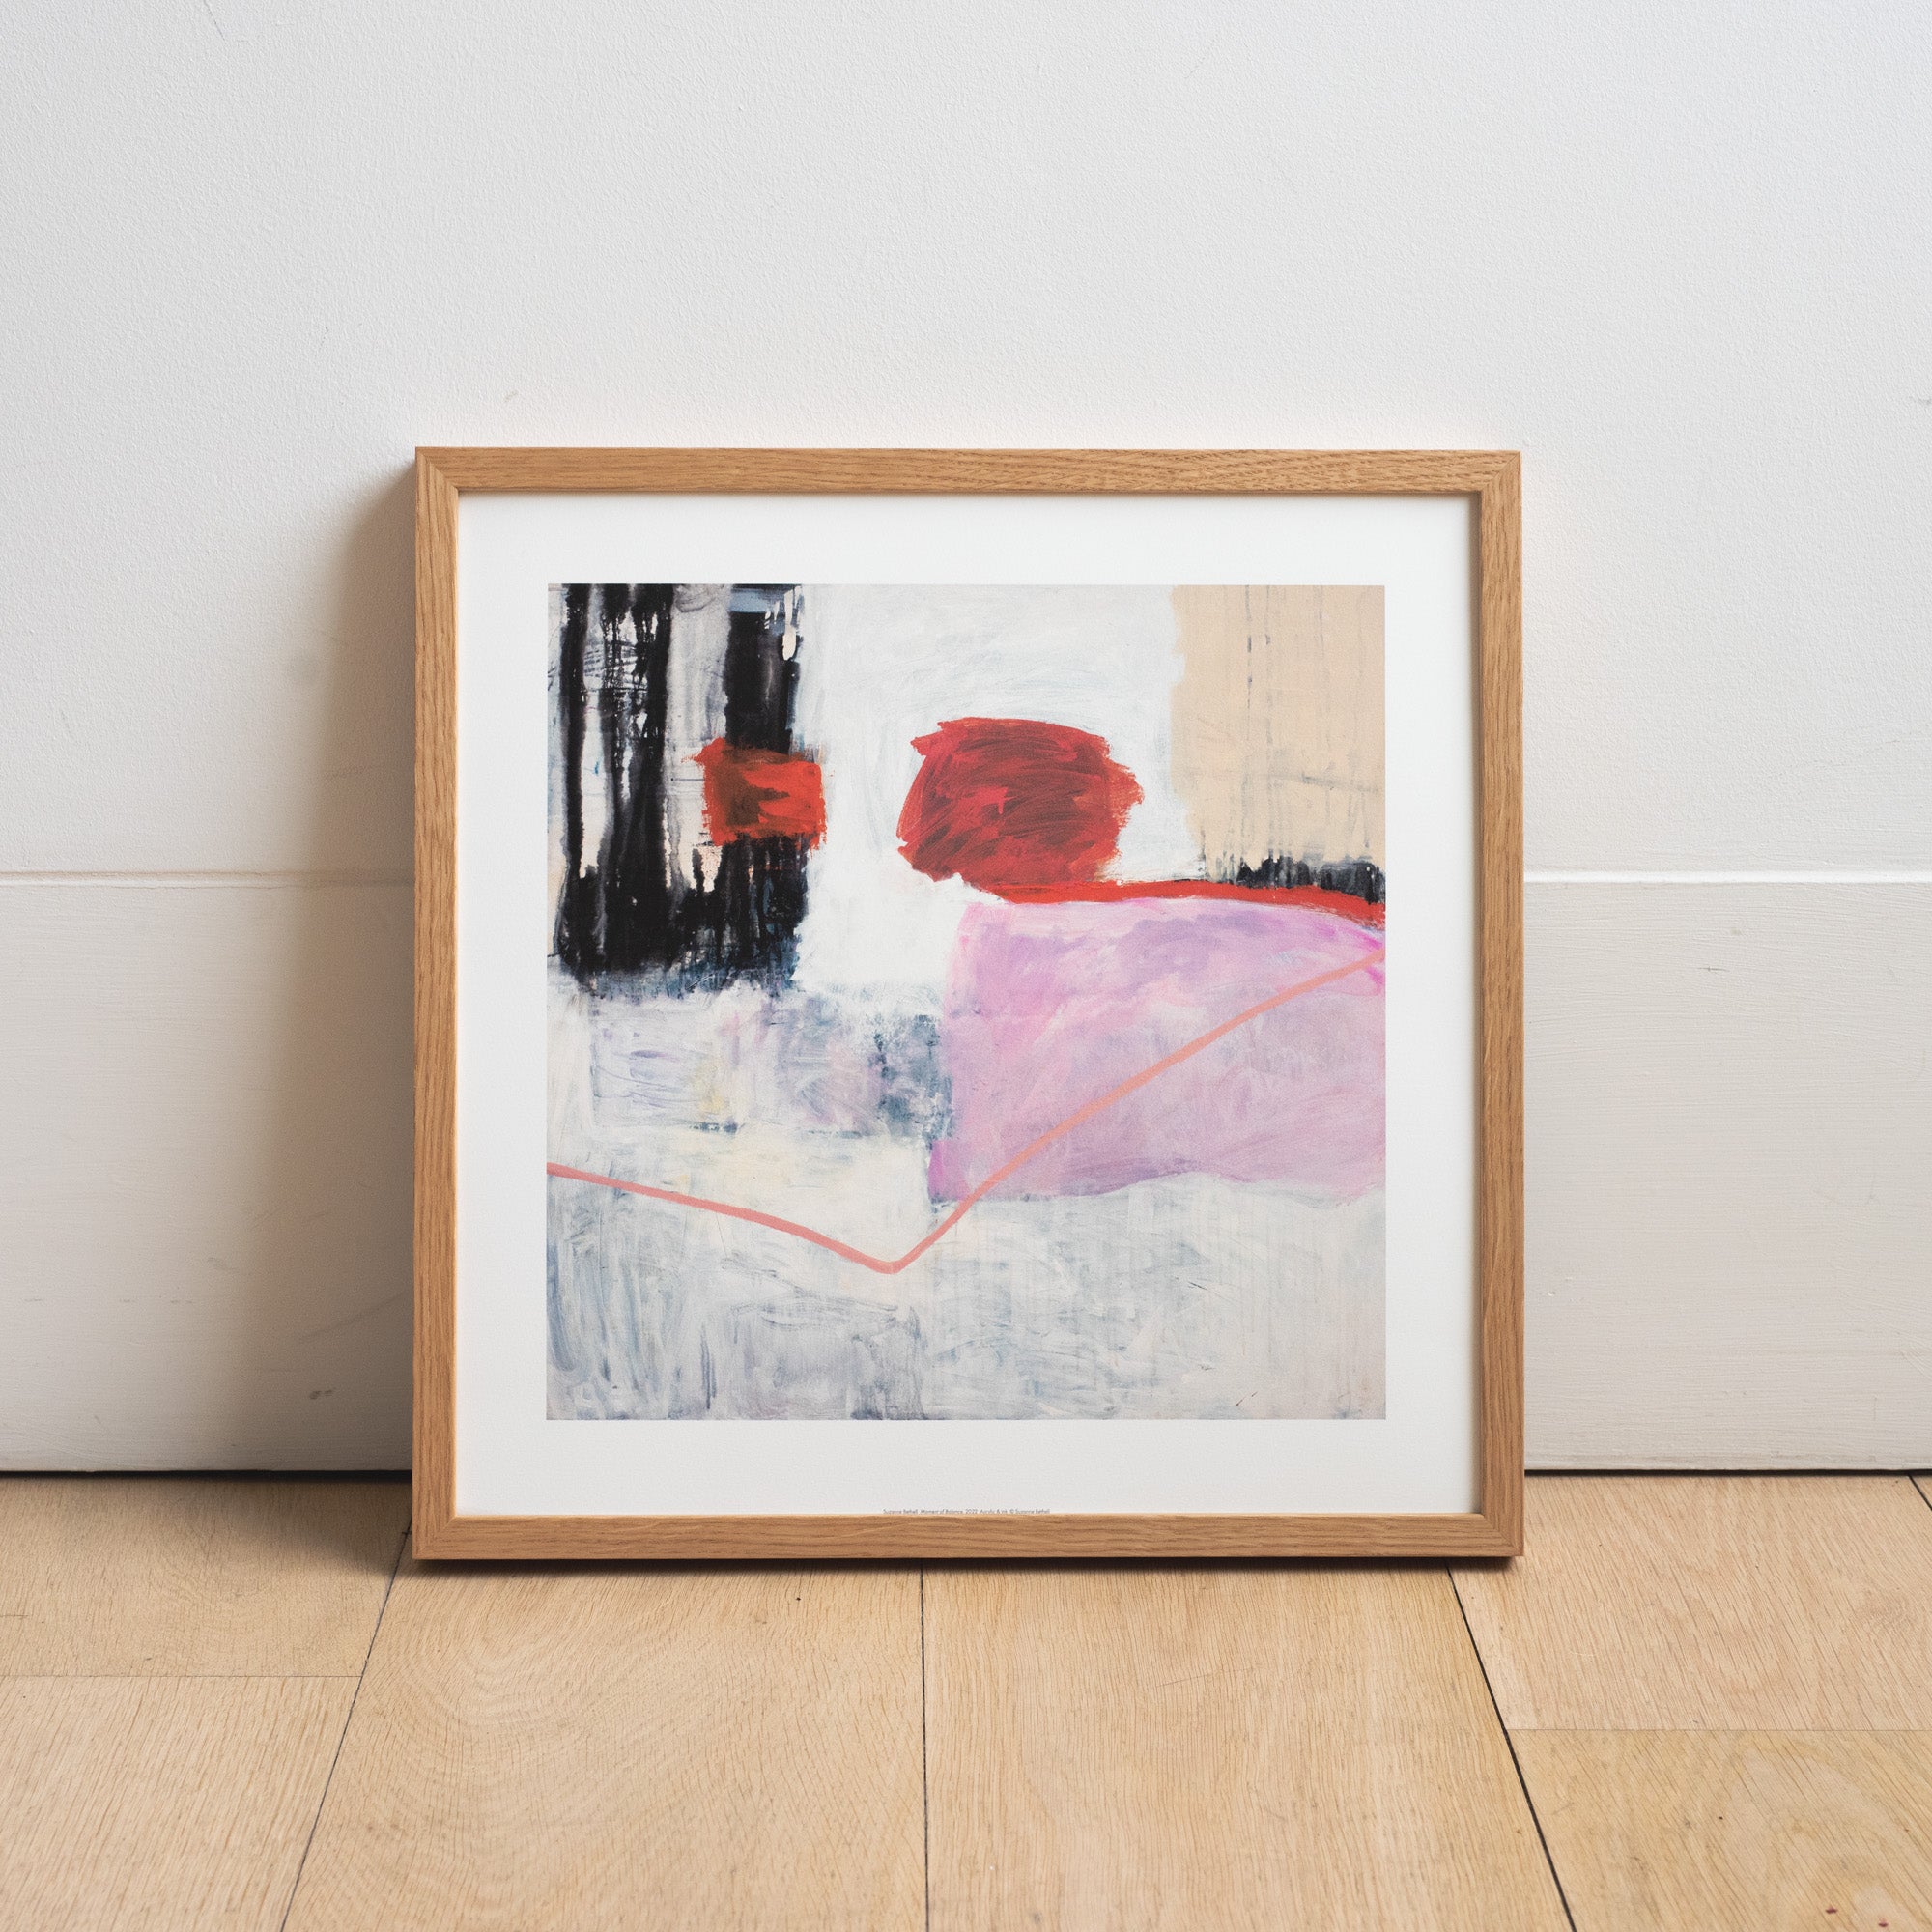 Reproduction of an abstract painting by Suzanne Bethell in an ash frame, rested against a white wall.